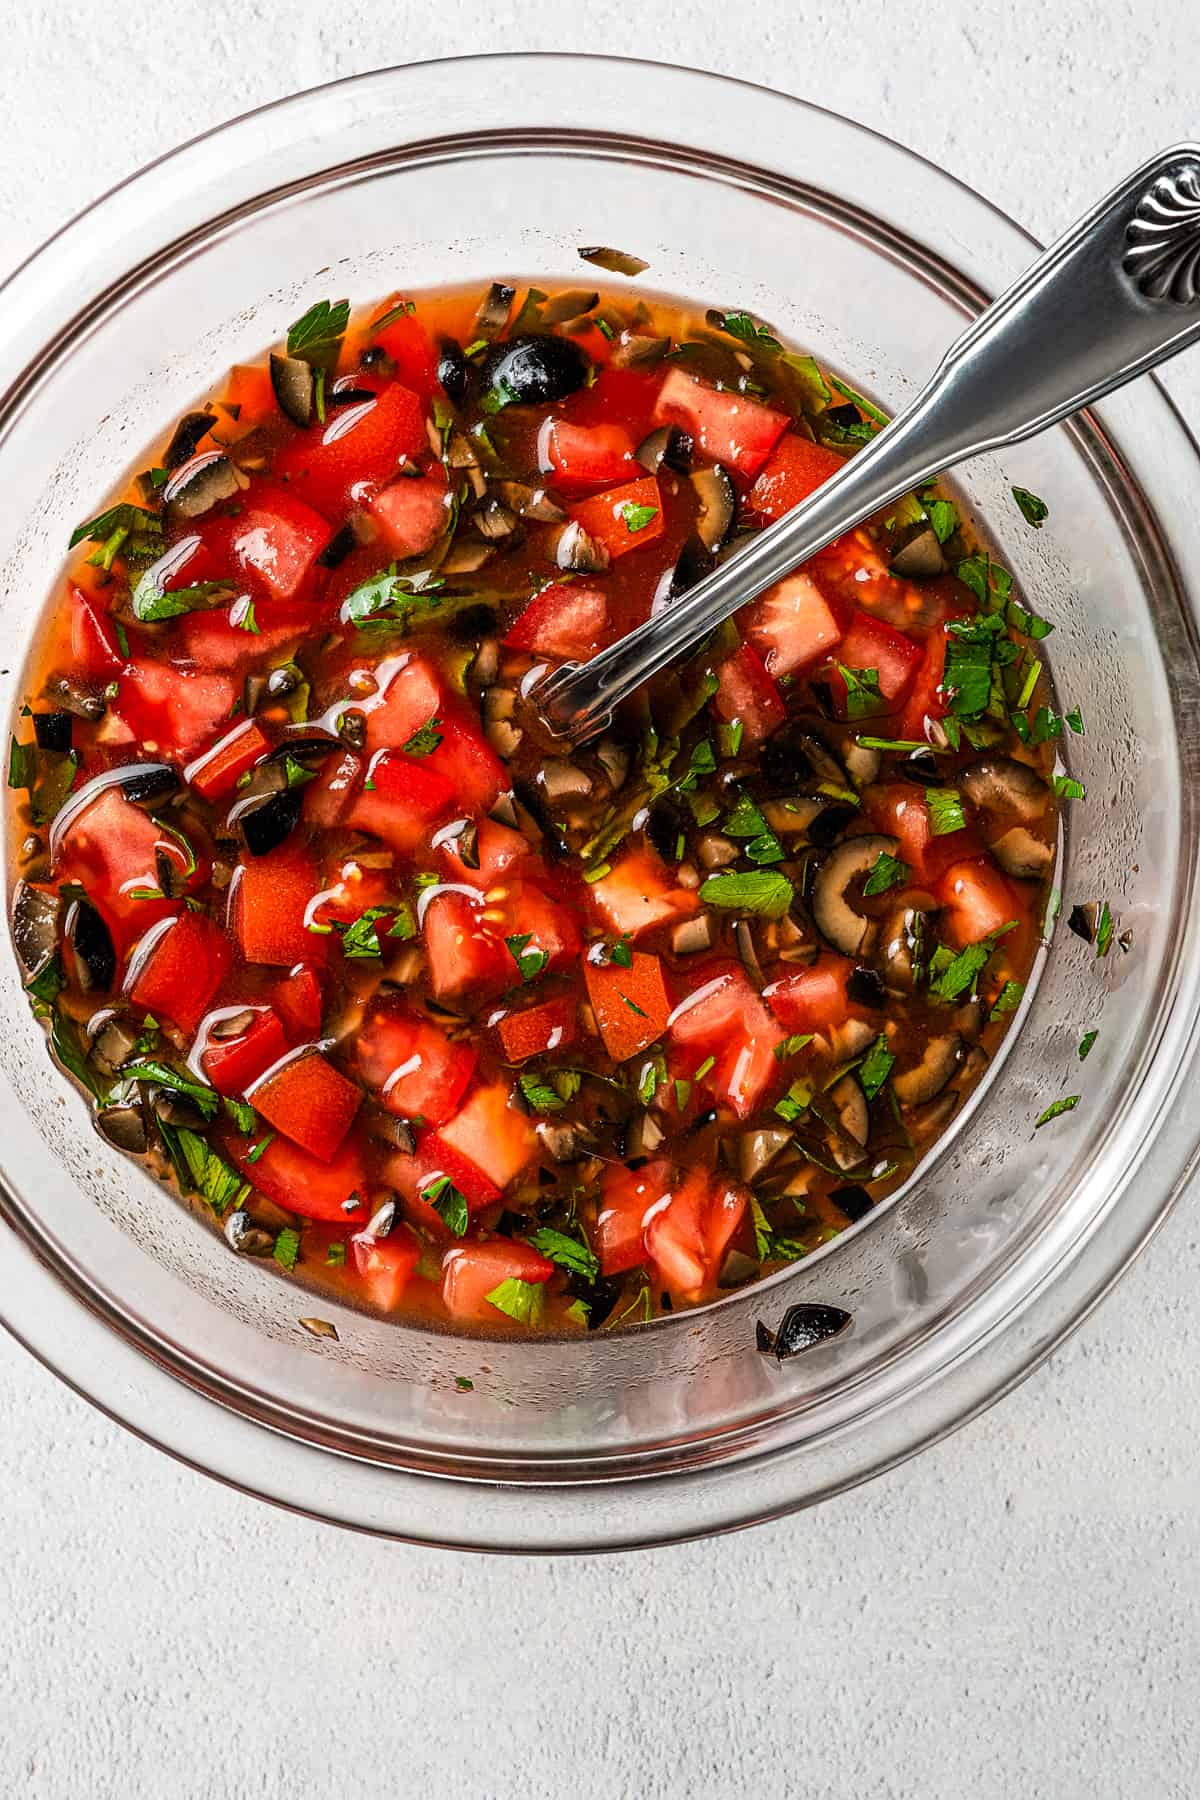 Tomatoes, vinaigrette, and other ingredients in a glass dish.